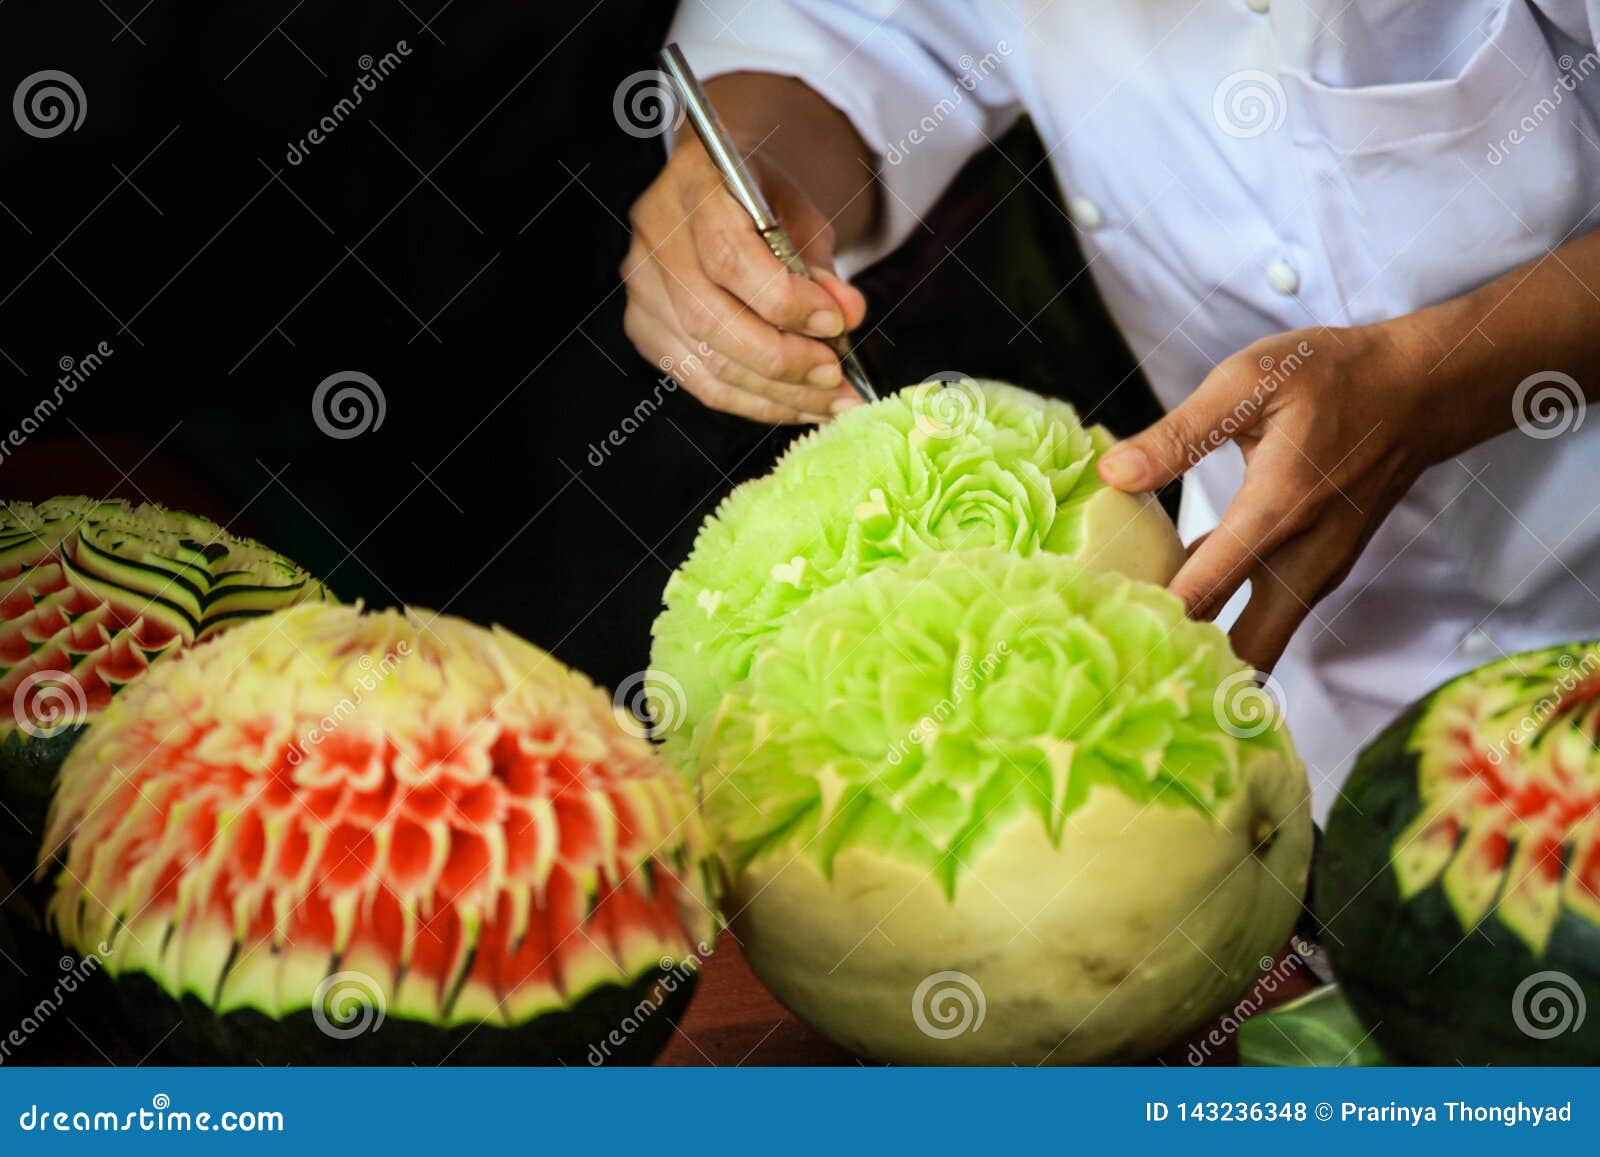 thai fruit carving with hand, vegetable and fruit carving